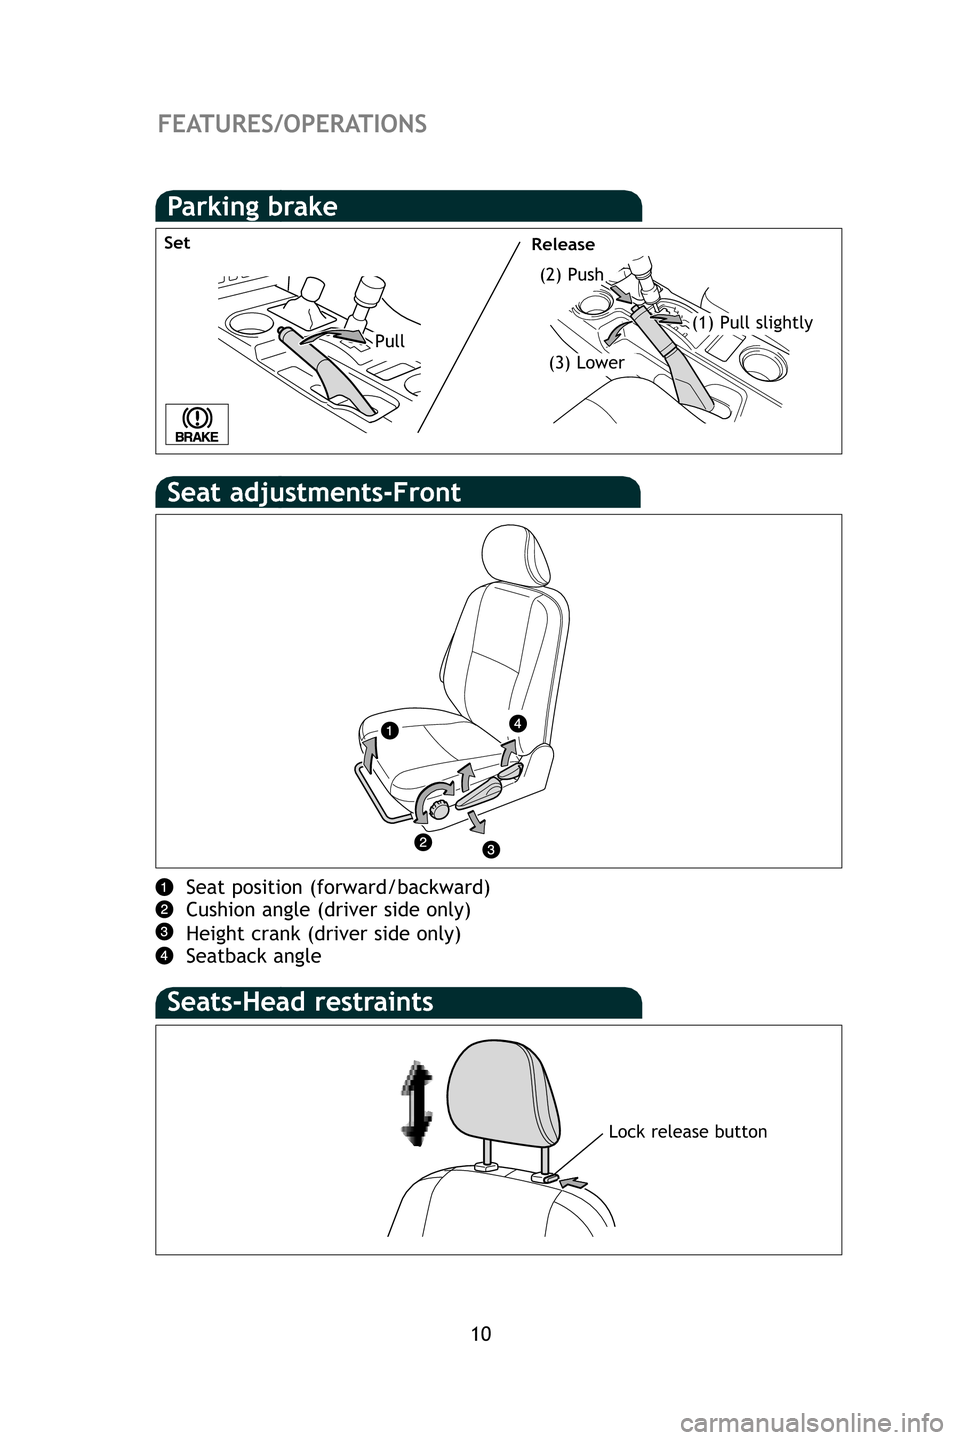 TOYOTA FJ CRUISER 2009 1.G Quick Reference Guide FEATURES/OPERATIONS
Seats-Head restraints
10
Lock release button
Seat adjustments-Front
Seat position (forward/backward)
Cushion angle (driver side only)
Height crank (driver side only)
Seatback angle